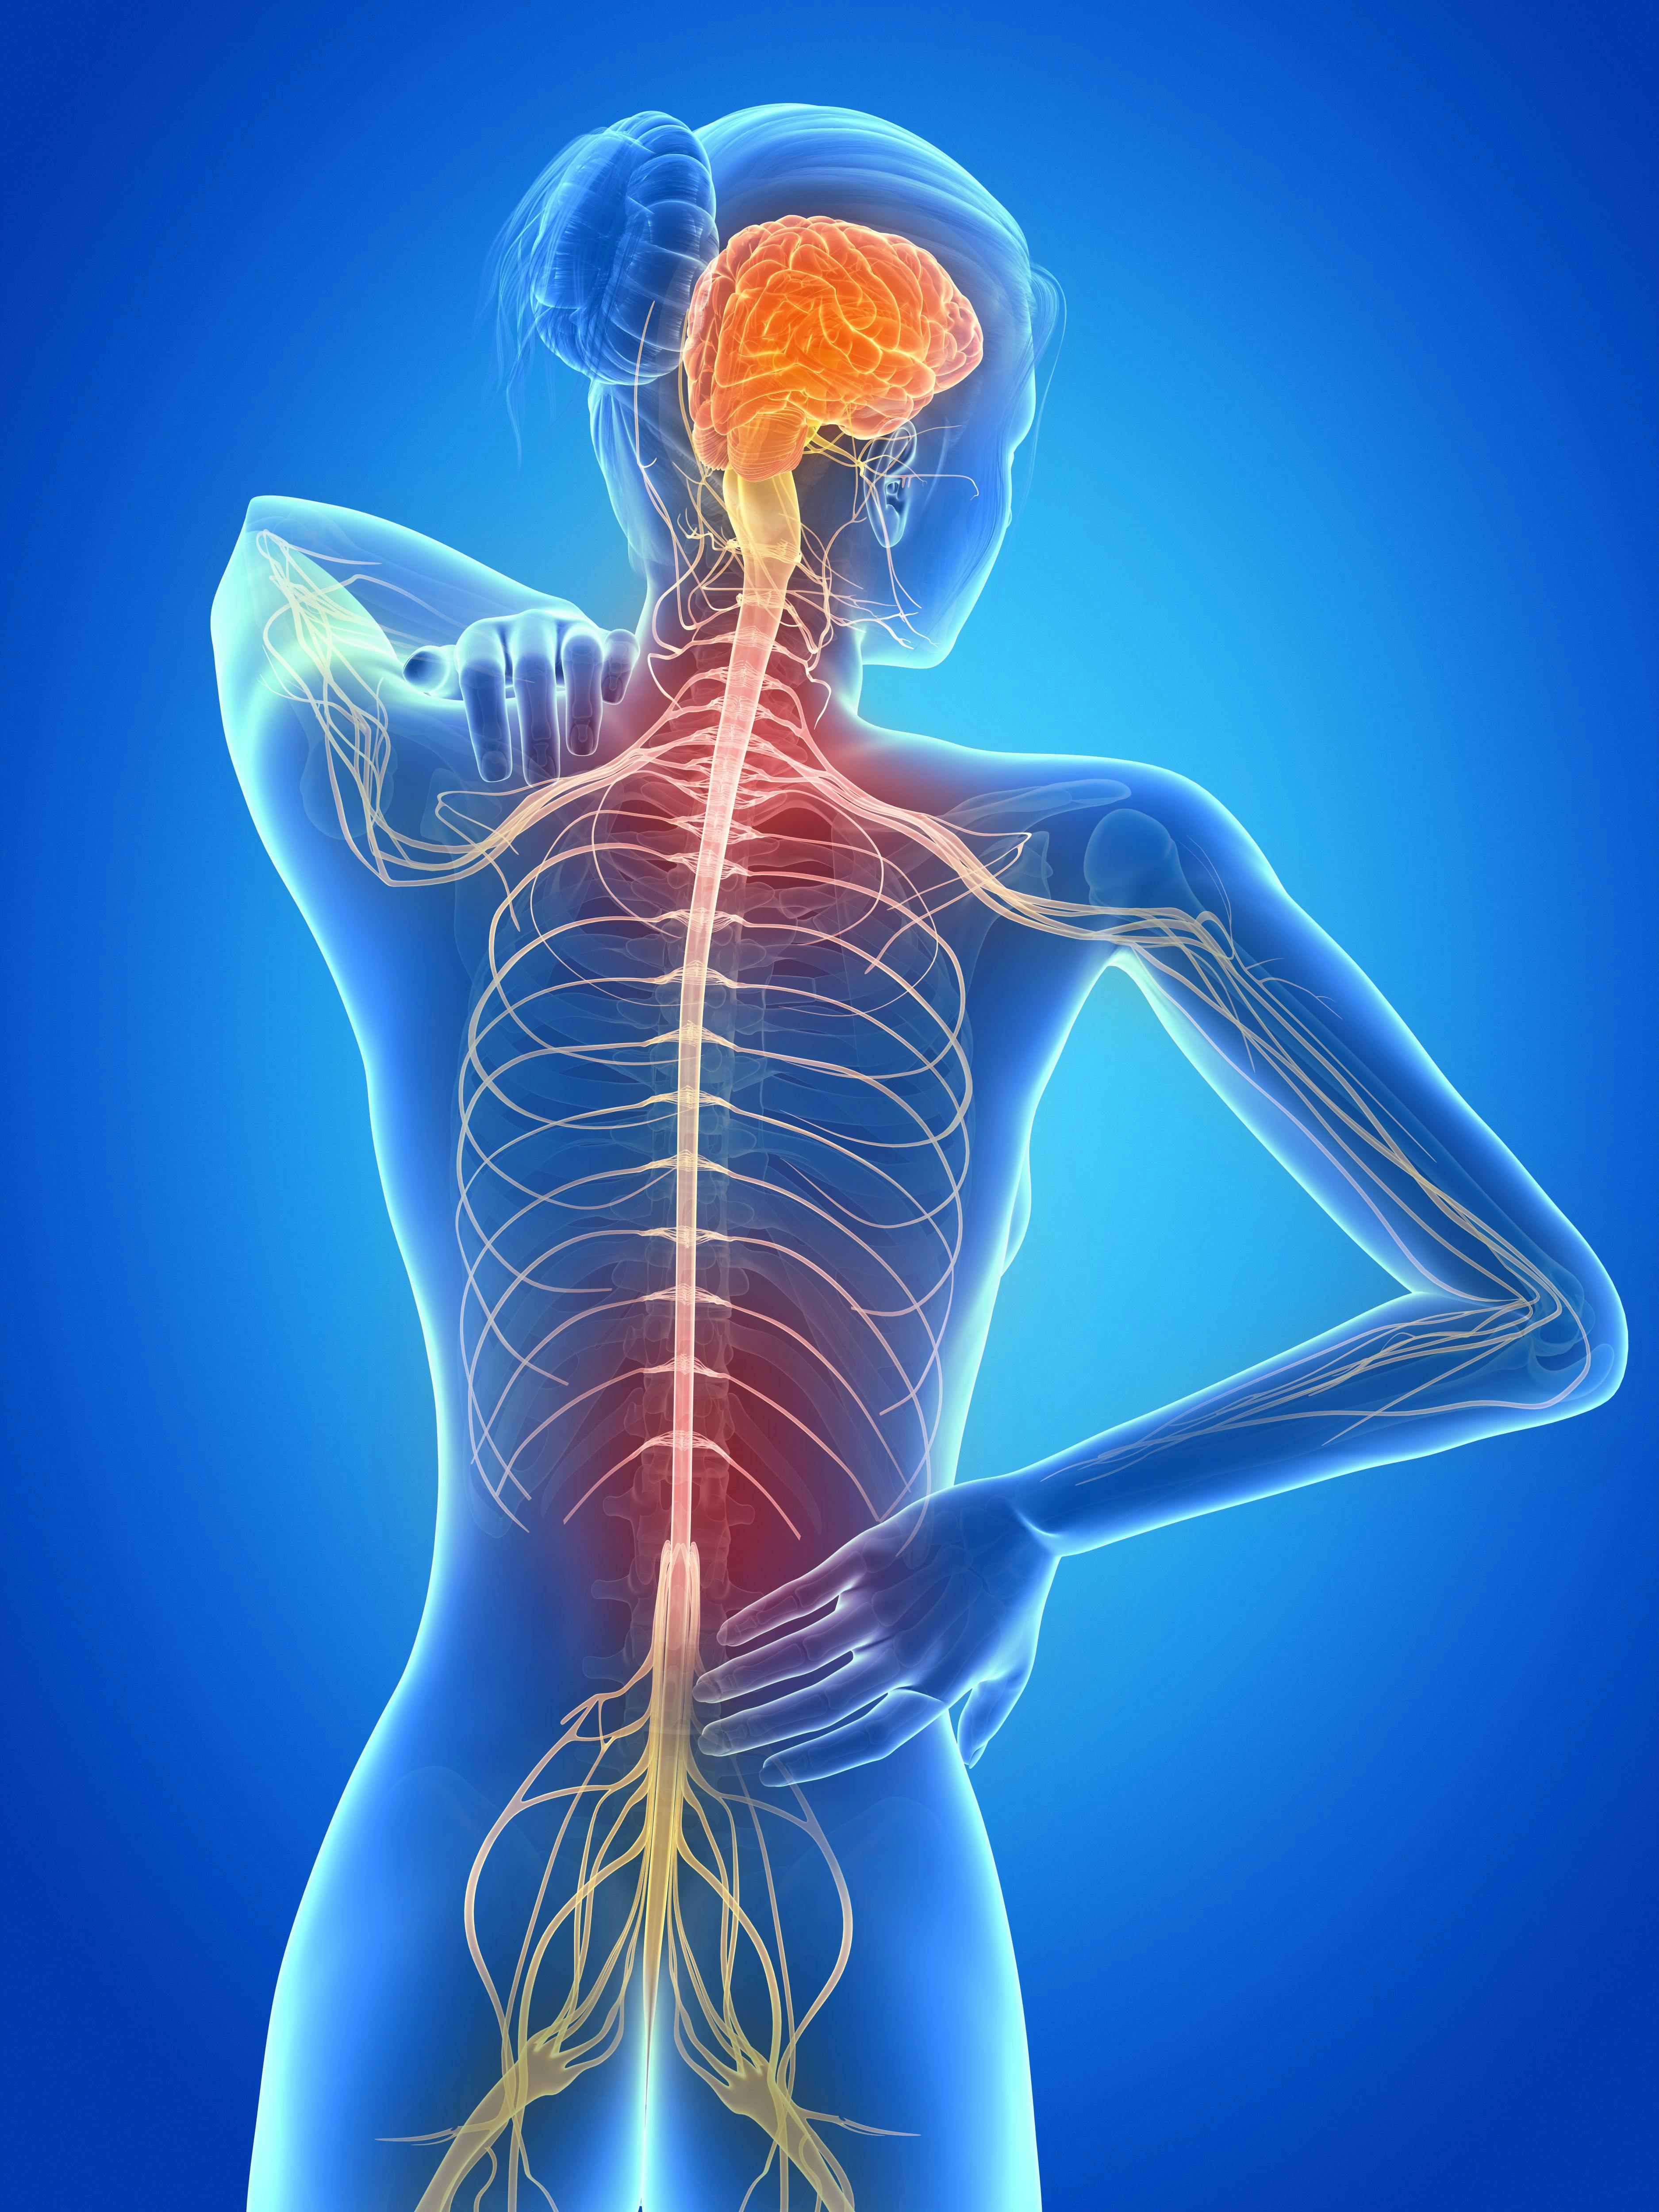 Investigators Highlight 4 Themes in Symptom Management for Head and Neck Cancer